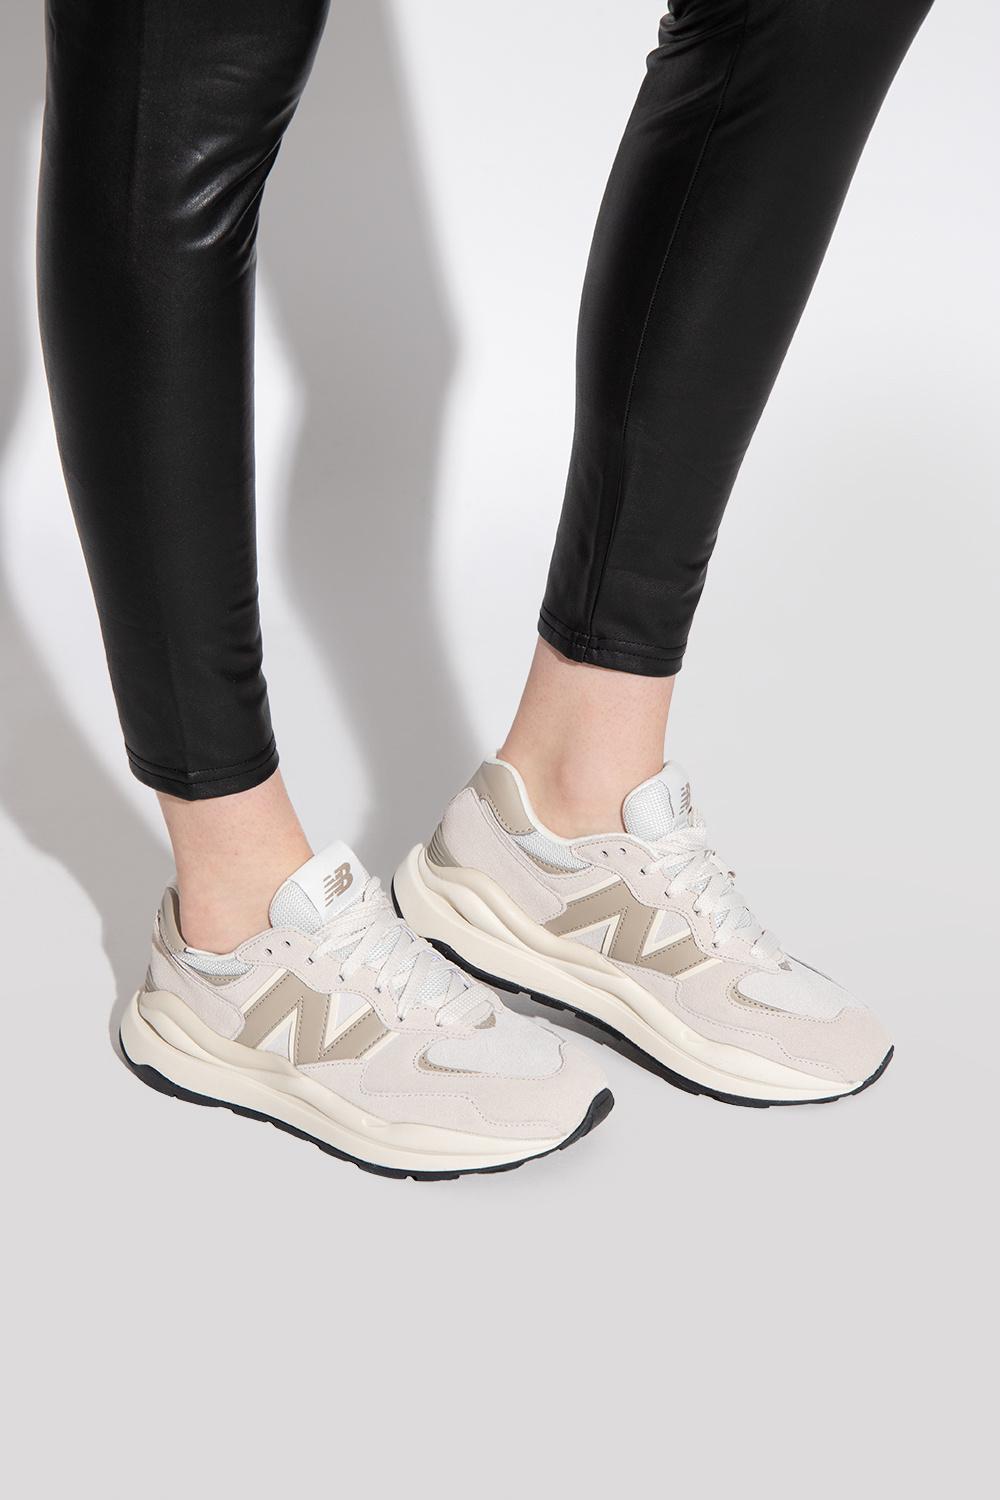 New Balance '5740' Sneakers in Beige (Natural) | Lyst